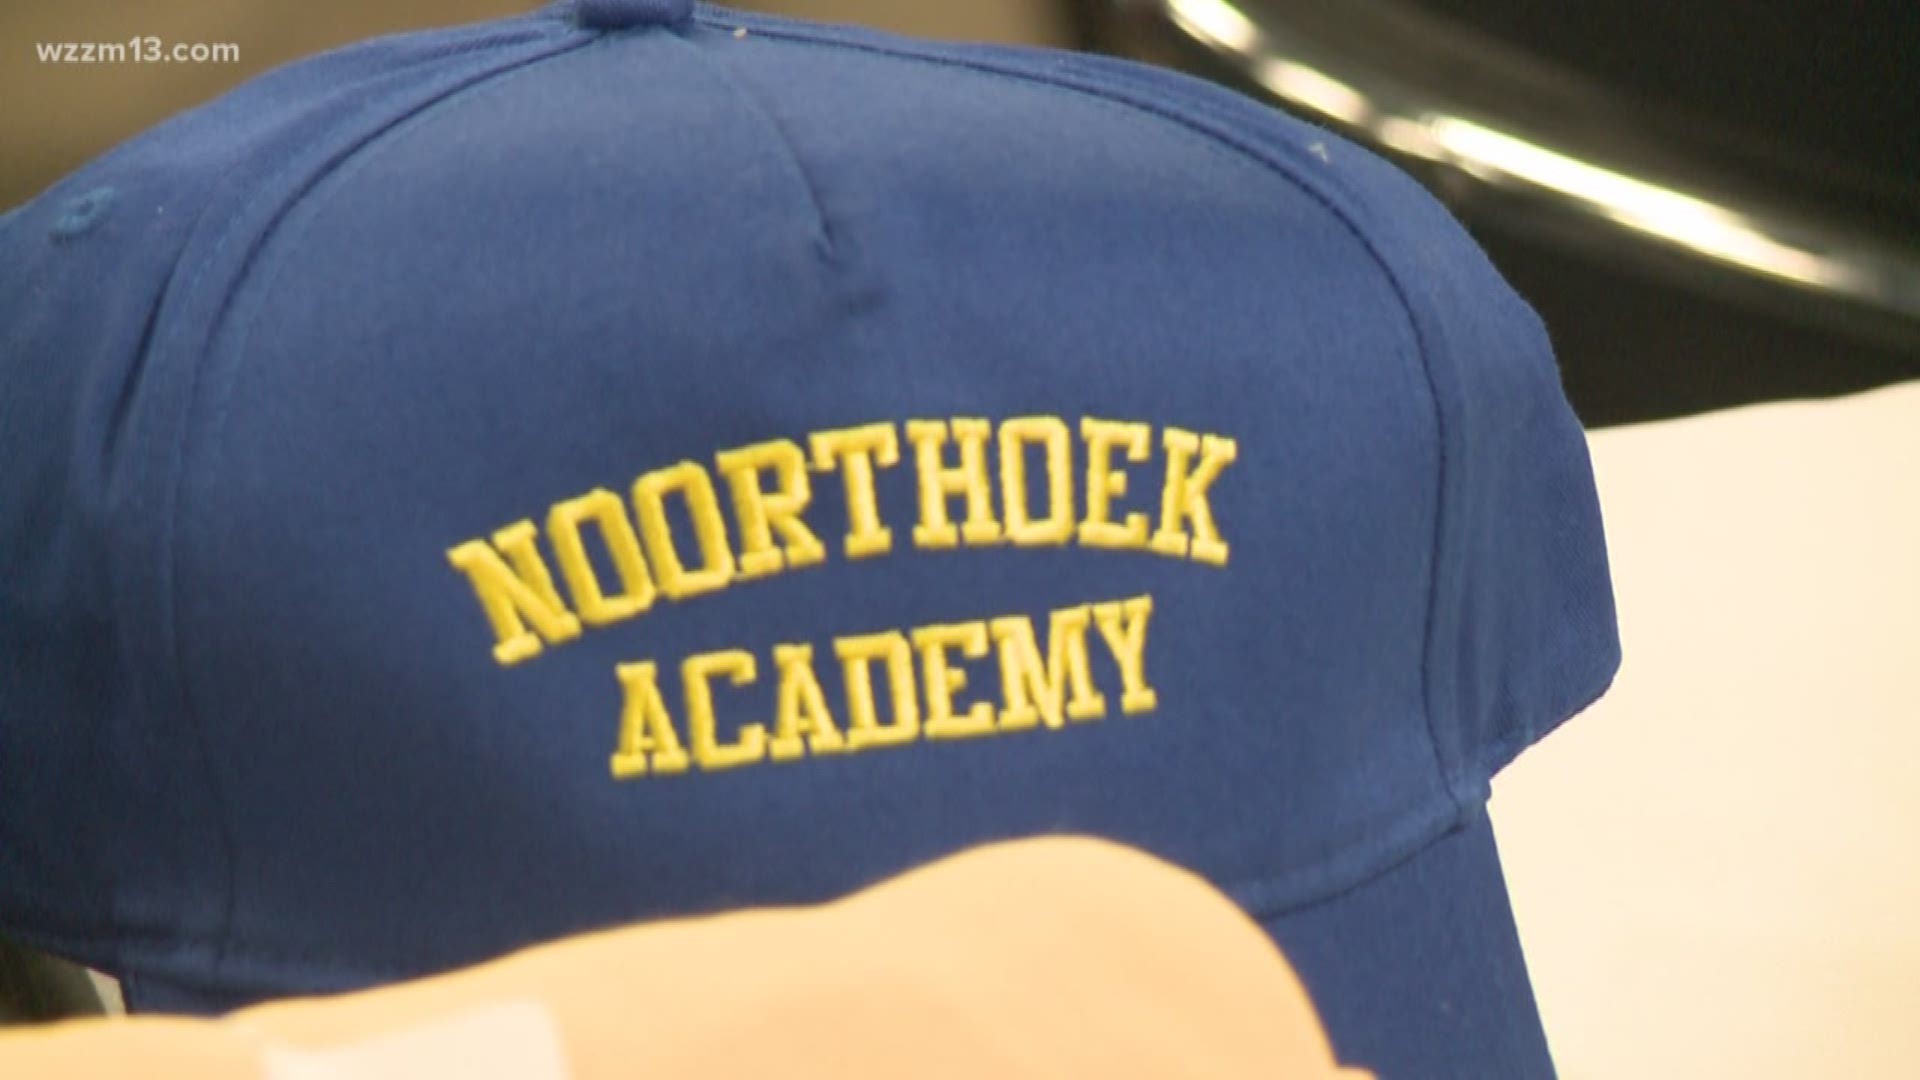 Noorthoek Academy at Grand Rapids Community College is celebrating 30 years of lifelong learning